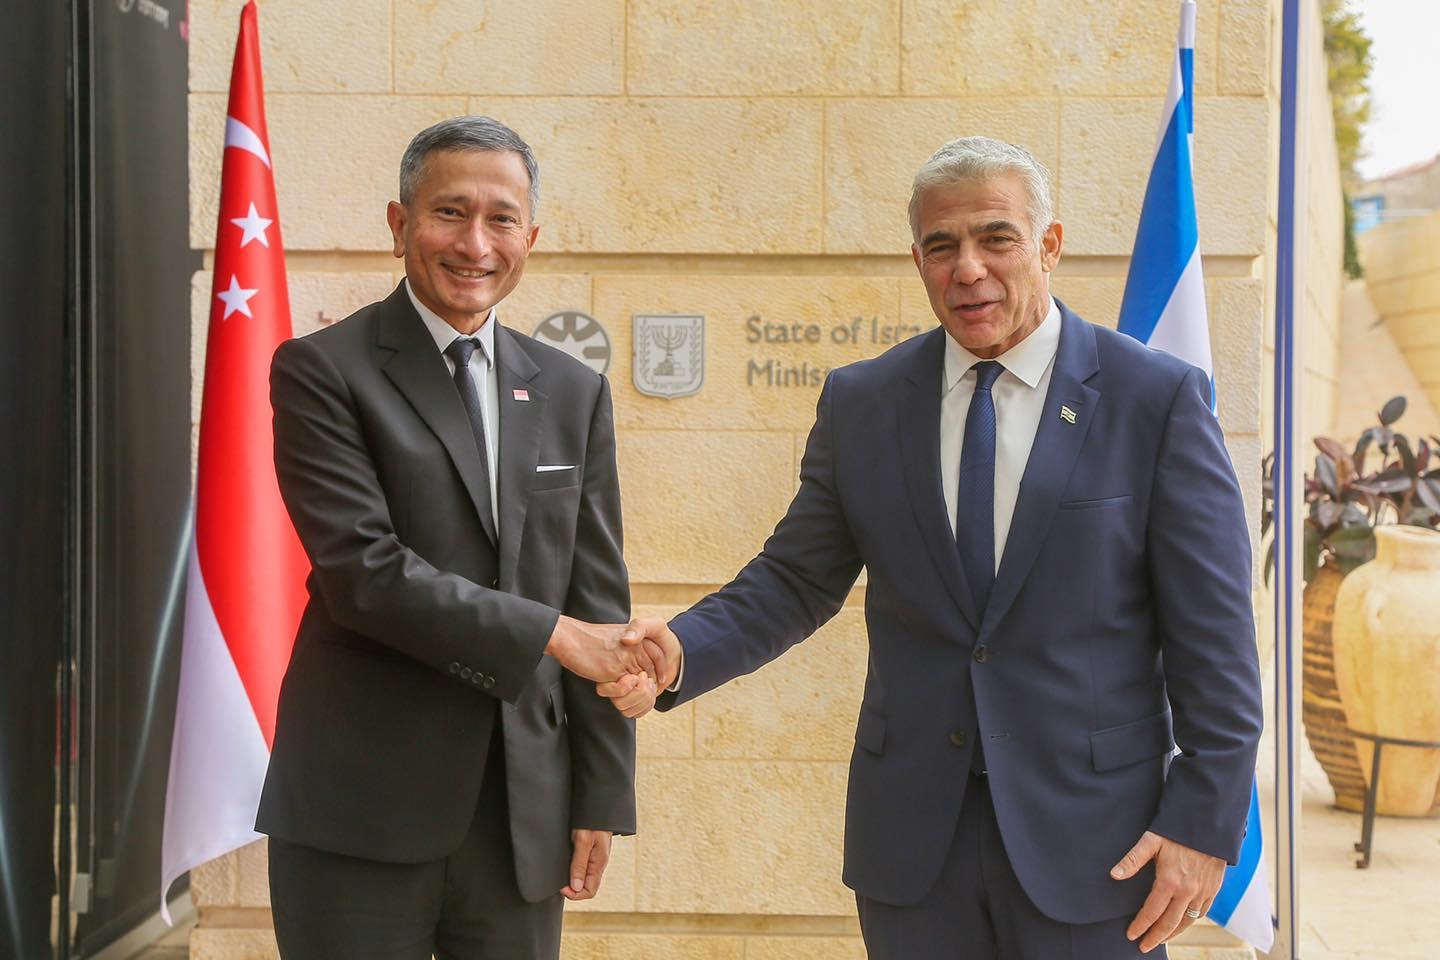 Singapore's Foreign Minister Vivian Balakrishnan shakes hands with his Israel counterpart Yair Lapid in this picture taken in the city-state yesterday. Photo: Facebook